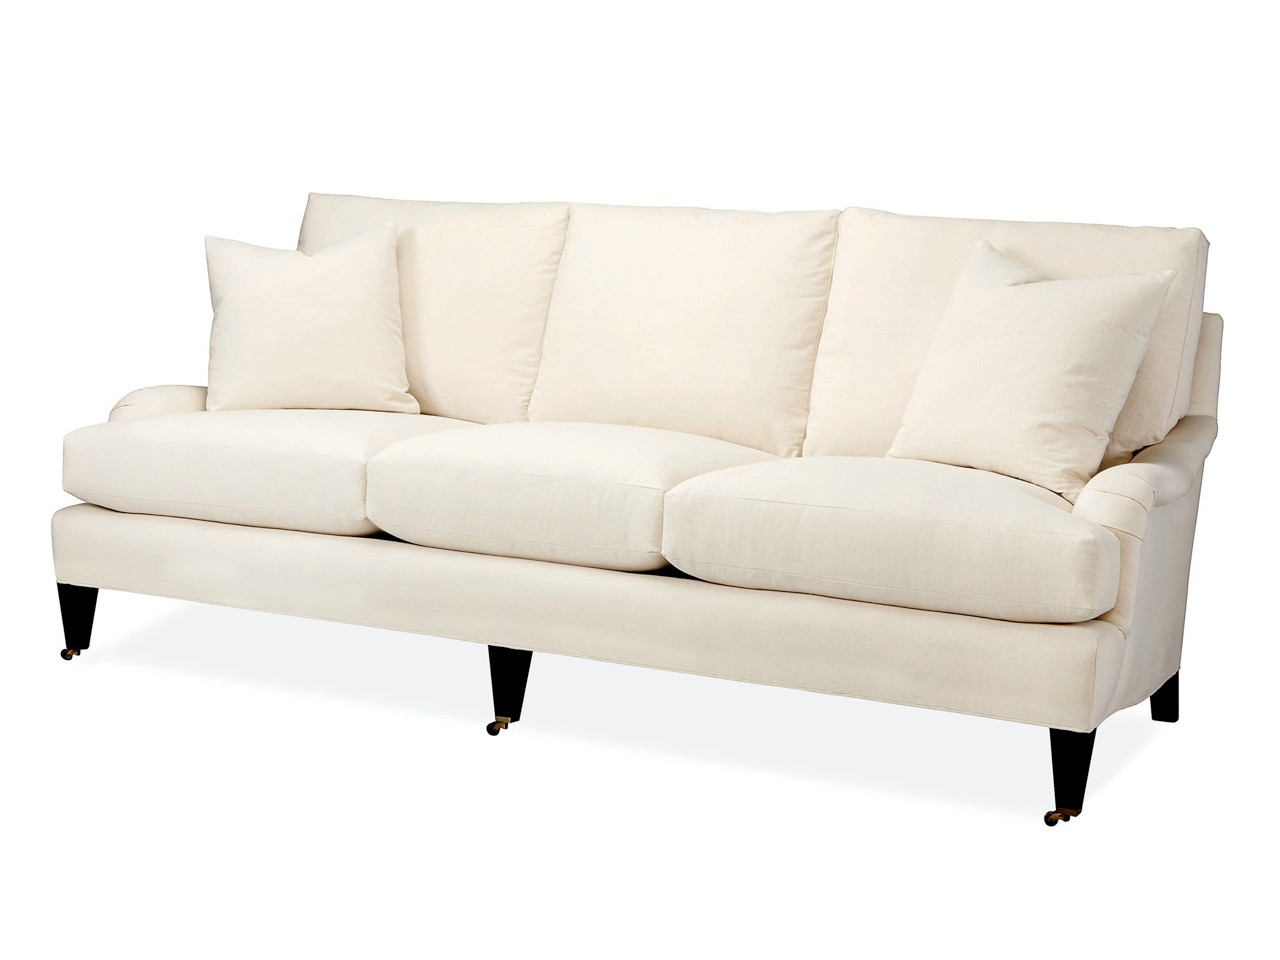 Batten Sofa with Casters, Sofas & Couches